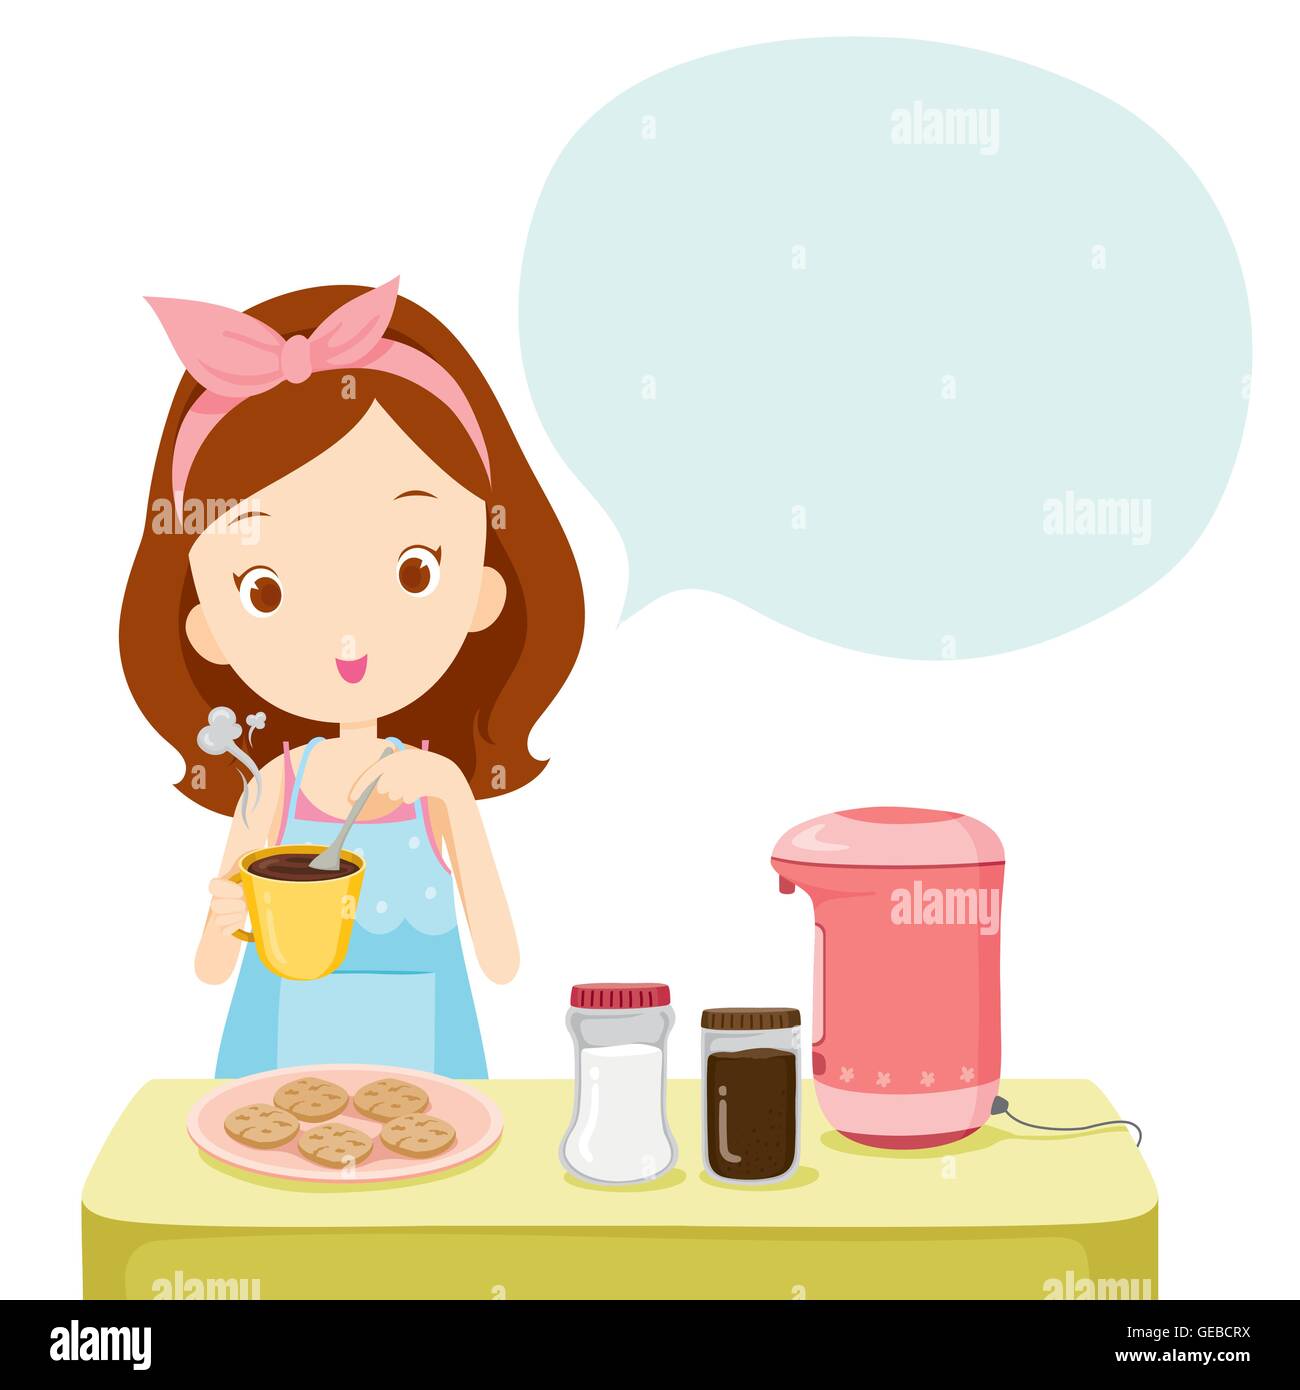 Girl Making Coffee With Talk Bubble, Kitchen, Kitchenware, Crockery, Cooking, Food, Bakery, Occupation, Lifestyle Stock Vector